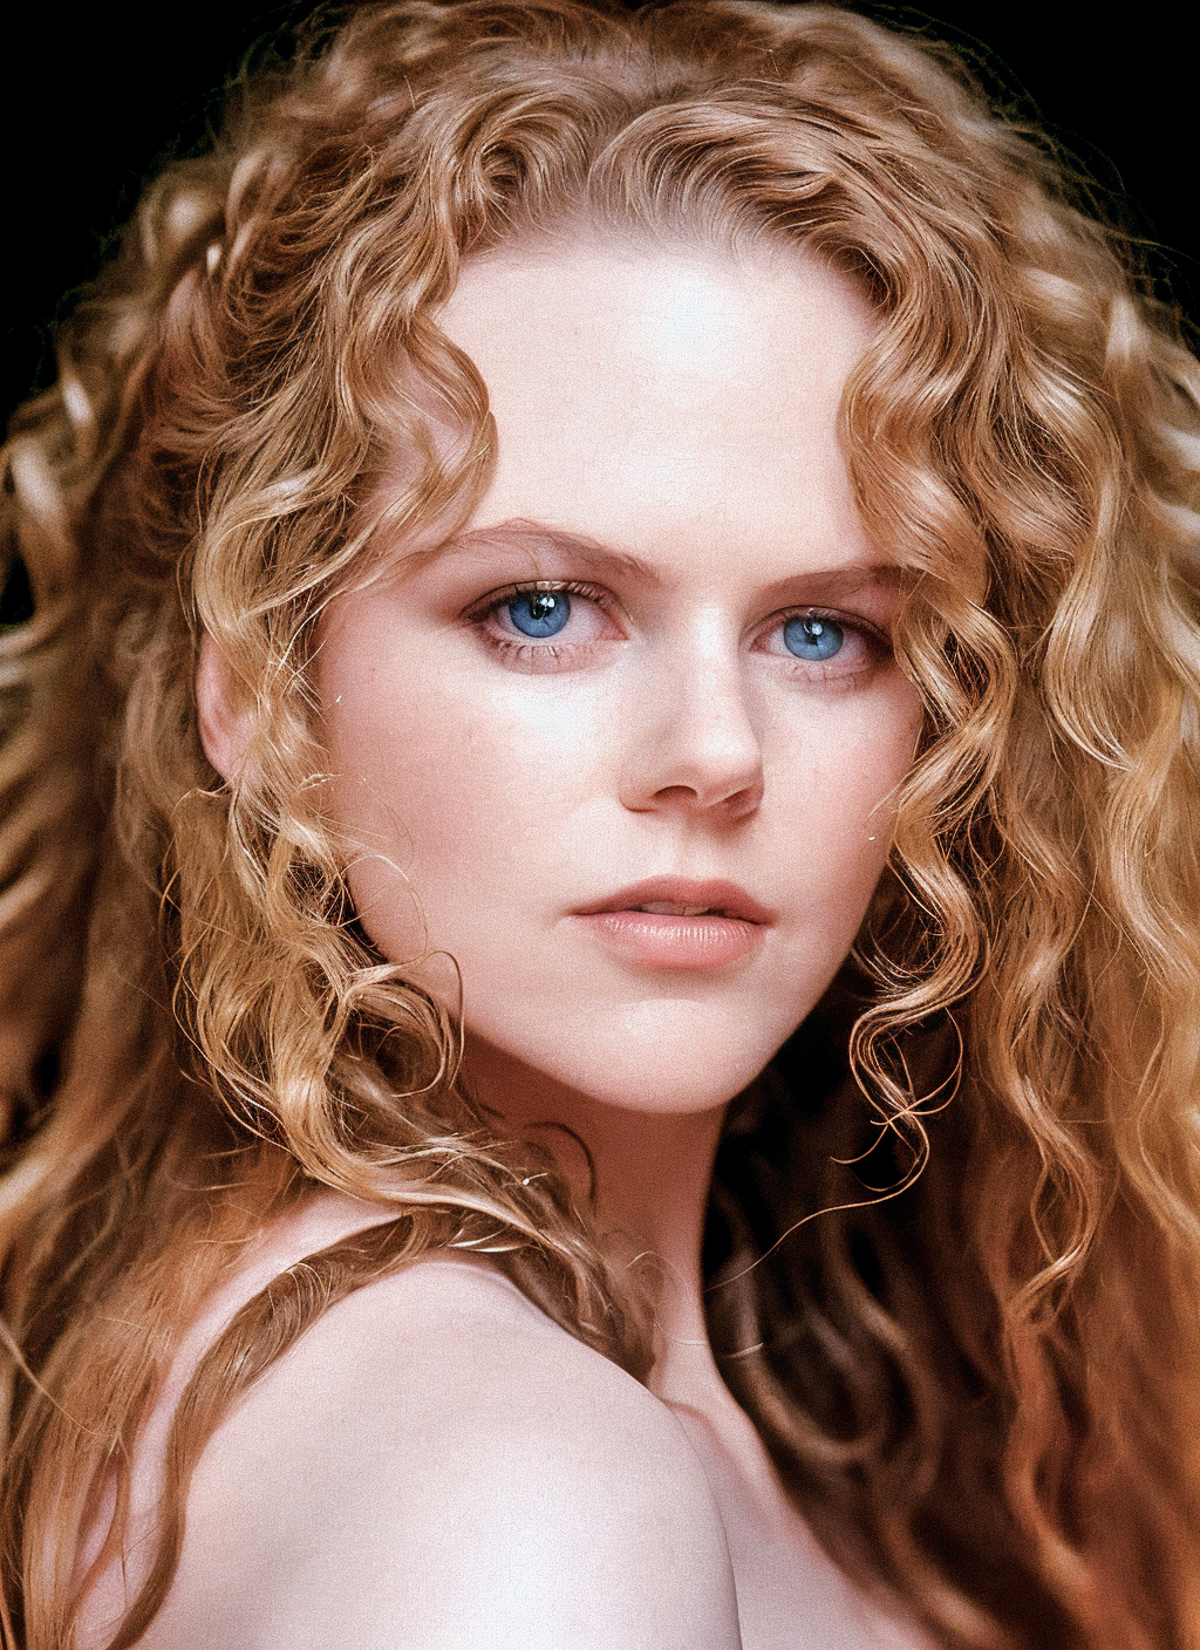 Nicole Kidman (from her early movies) image by astragartist